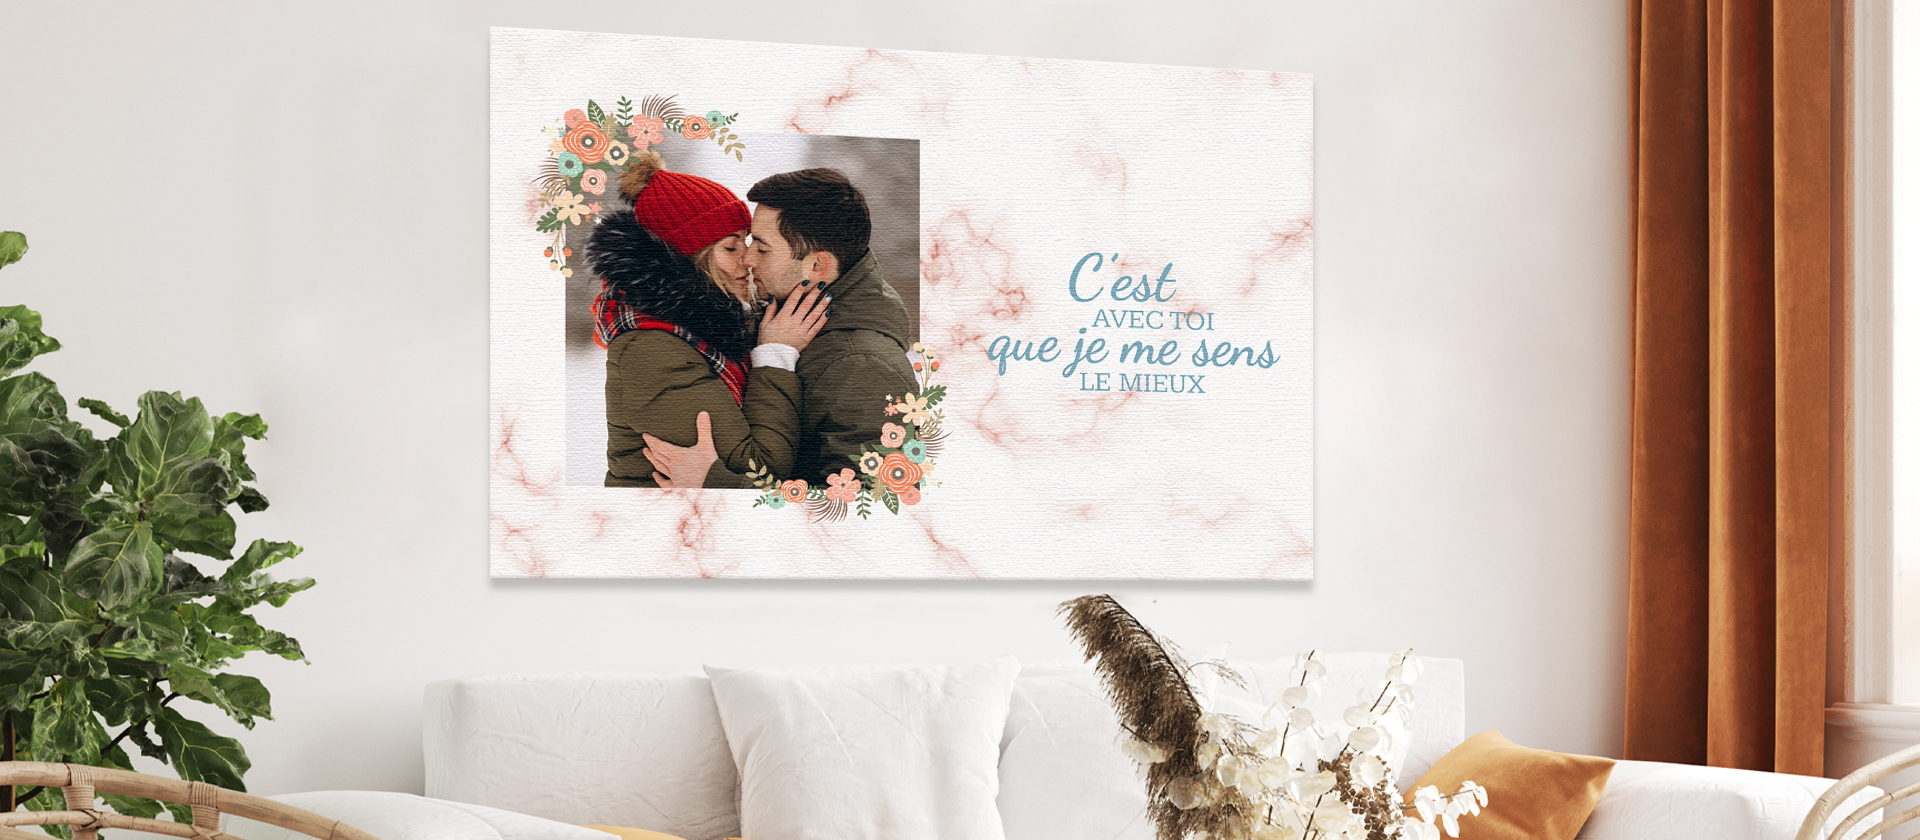 Rotate banner to show information on personalized Home Decor and Canvas Prints